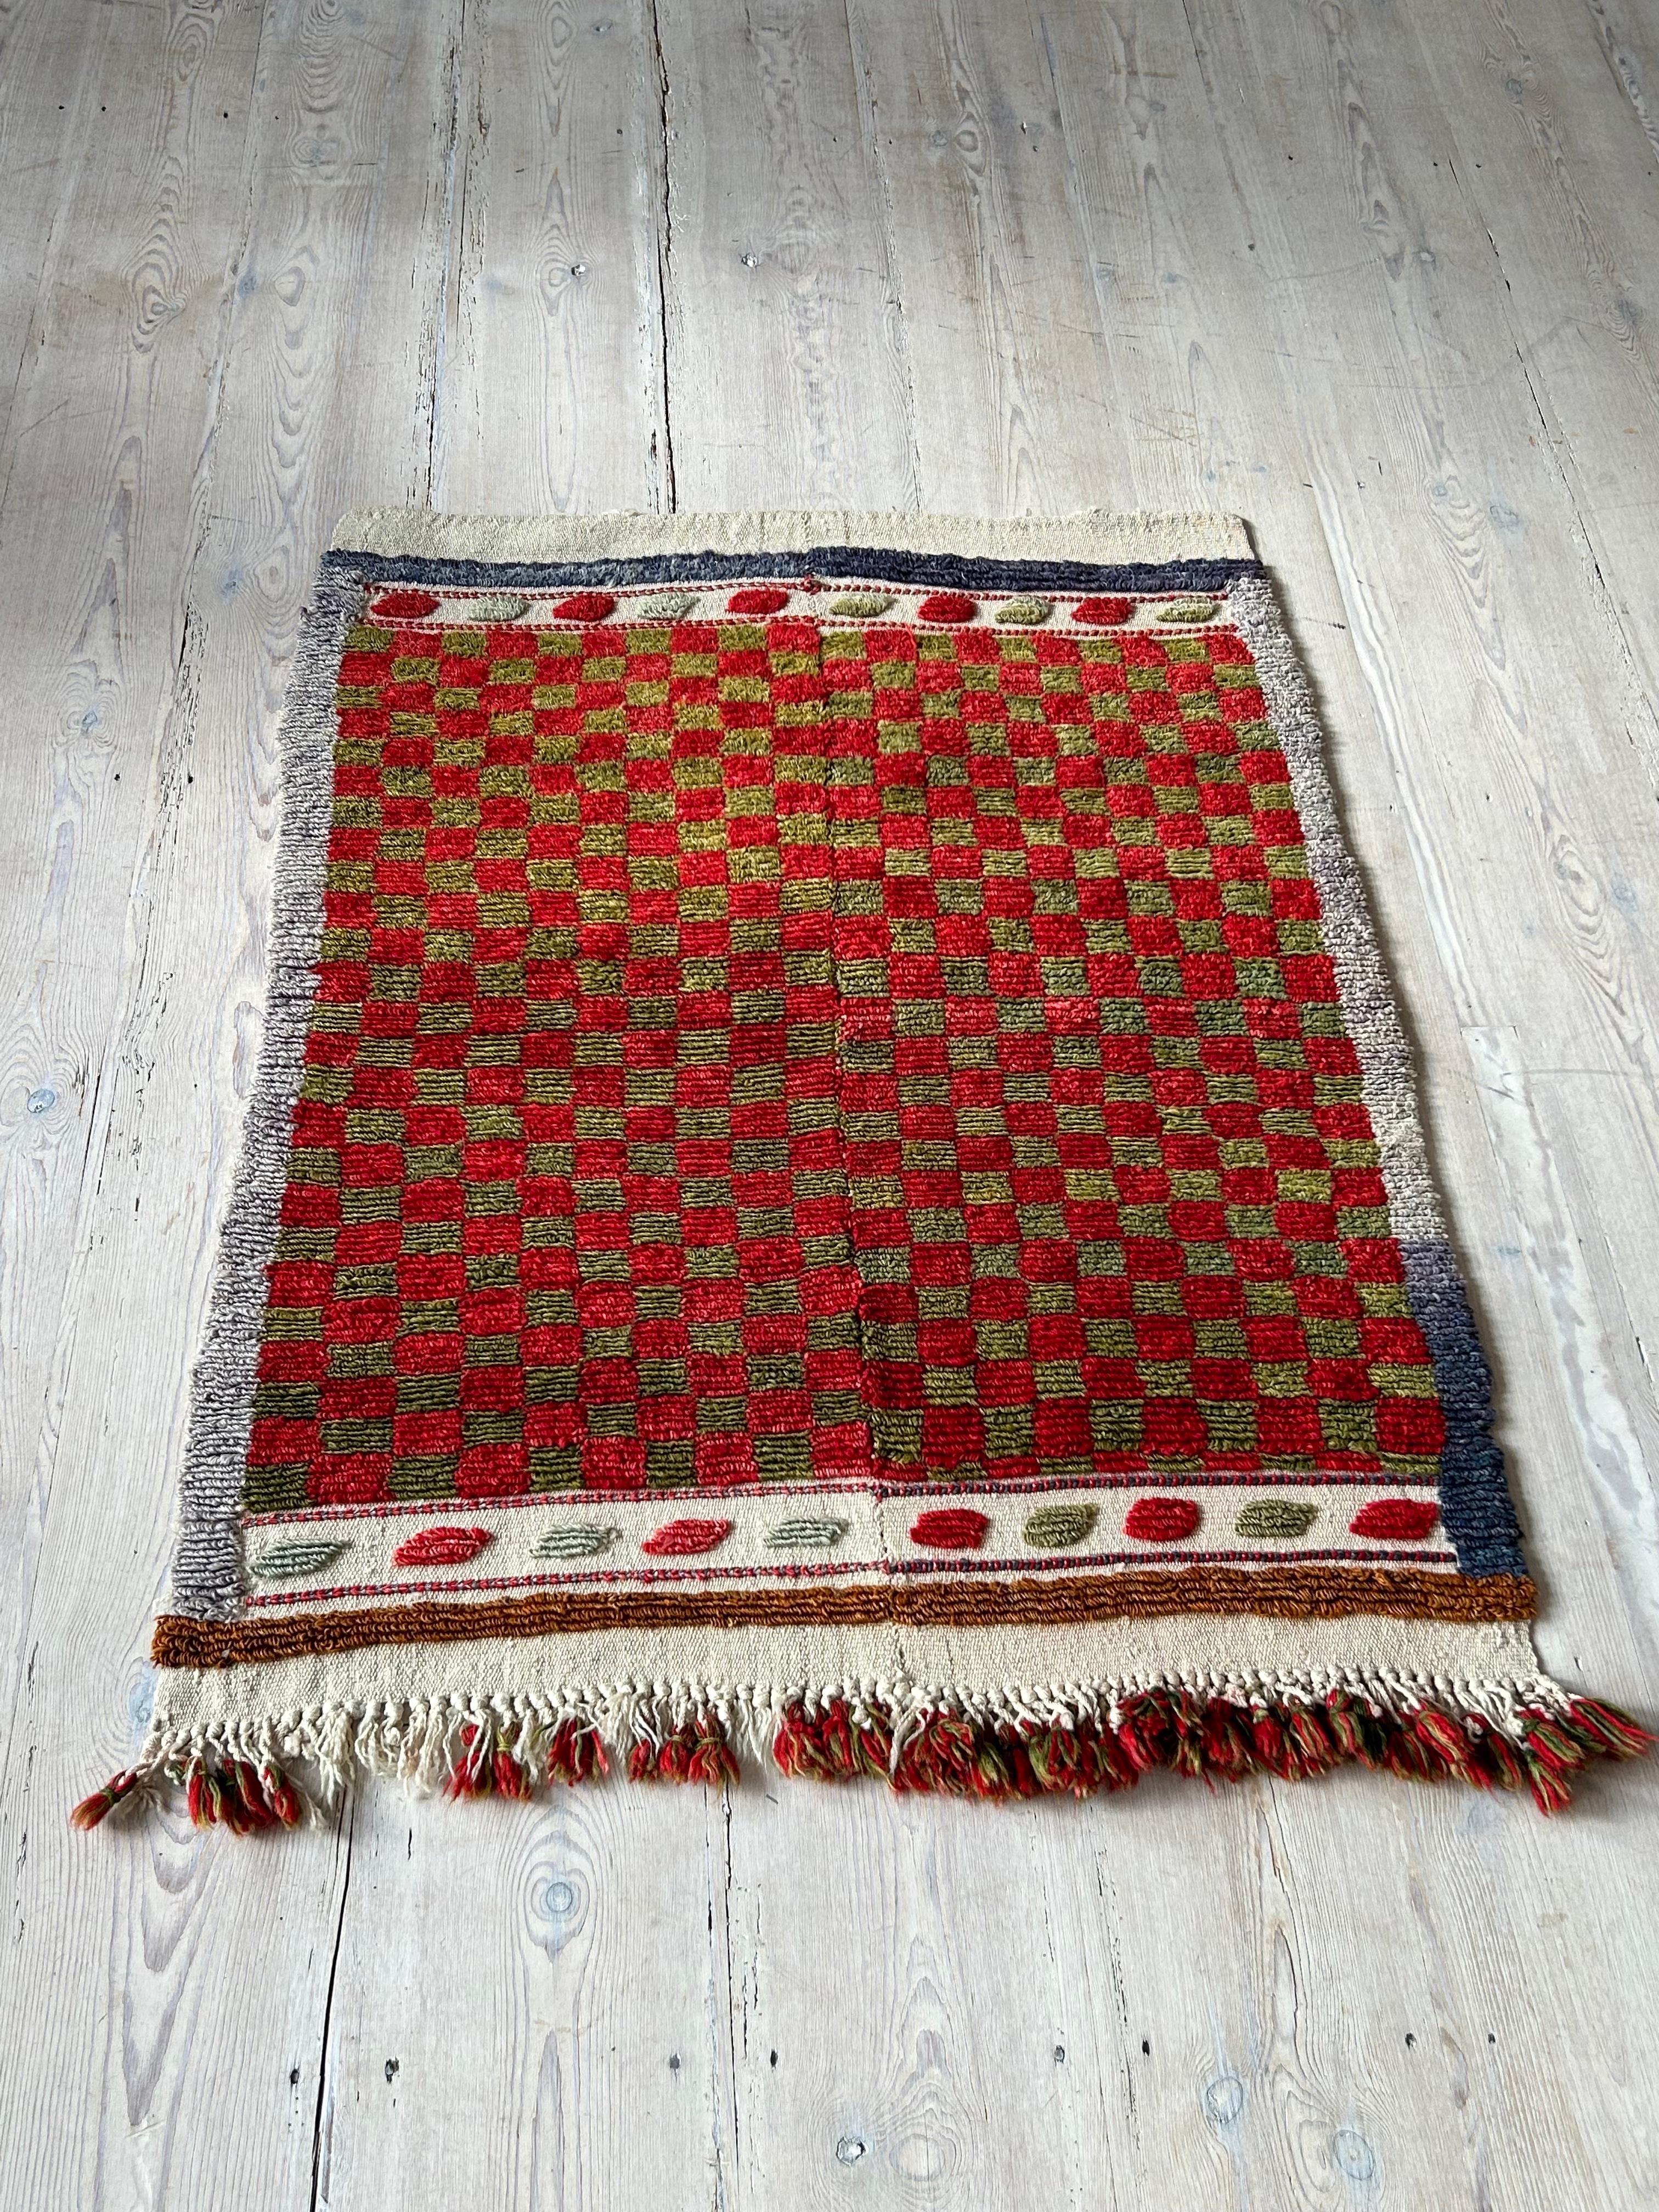 Turkish Vintage Angora Loop Pile Rug in Red & Green Check Pattern, Turkey, 20th Century For Sale